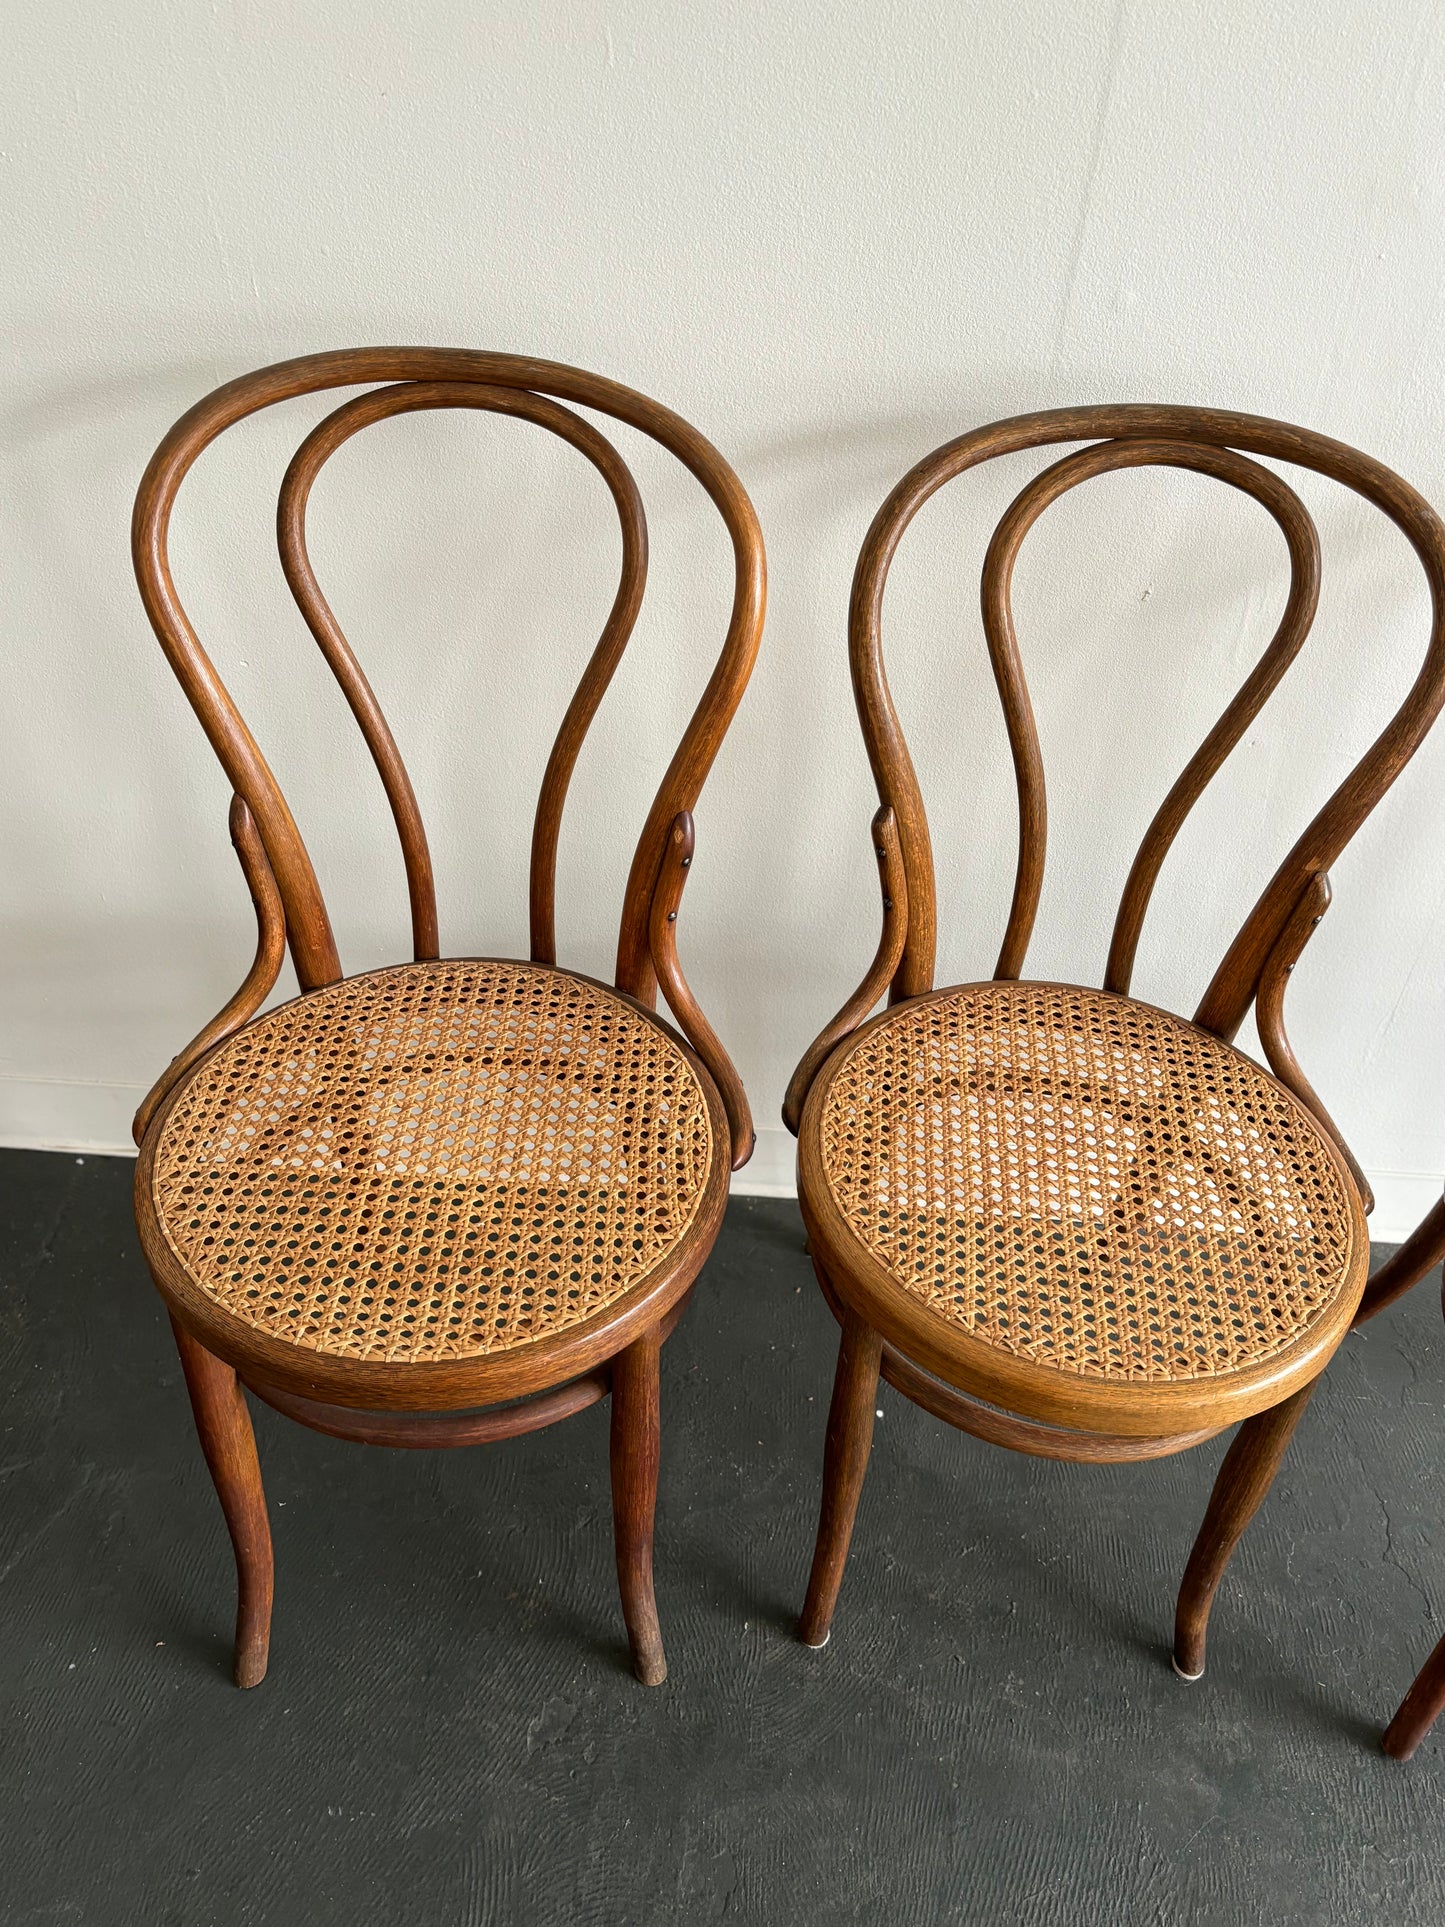 Thonet-style Bentwood Chairs